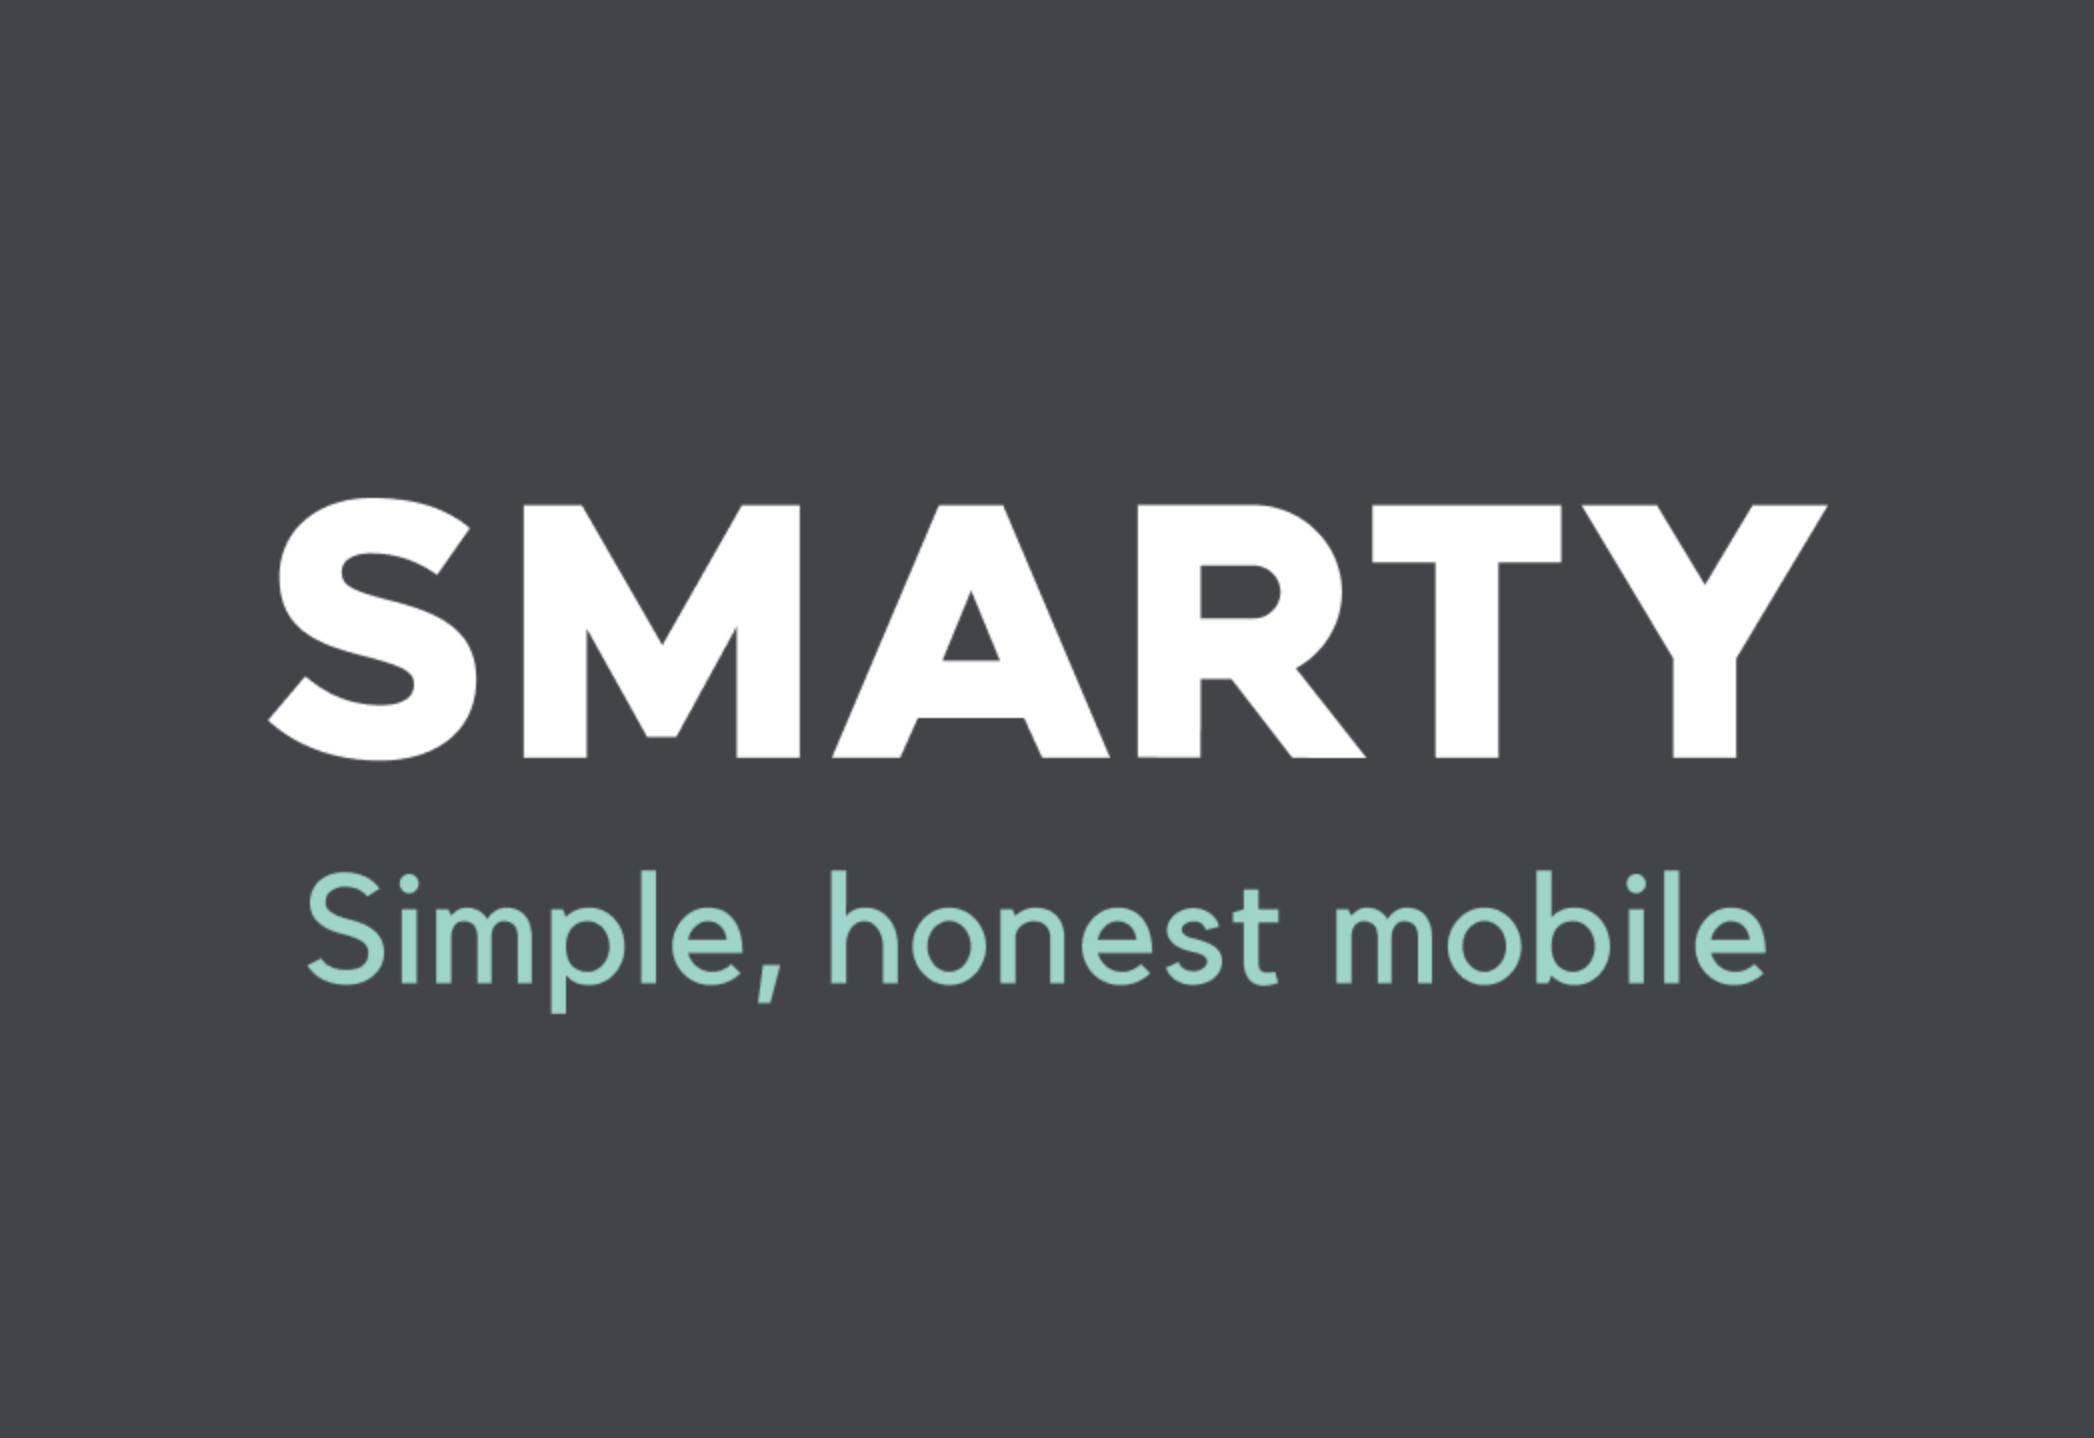 Smarty piggybacks on the Three network and offers great value for money